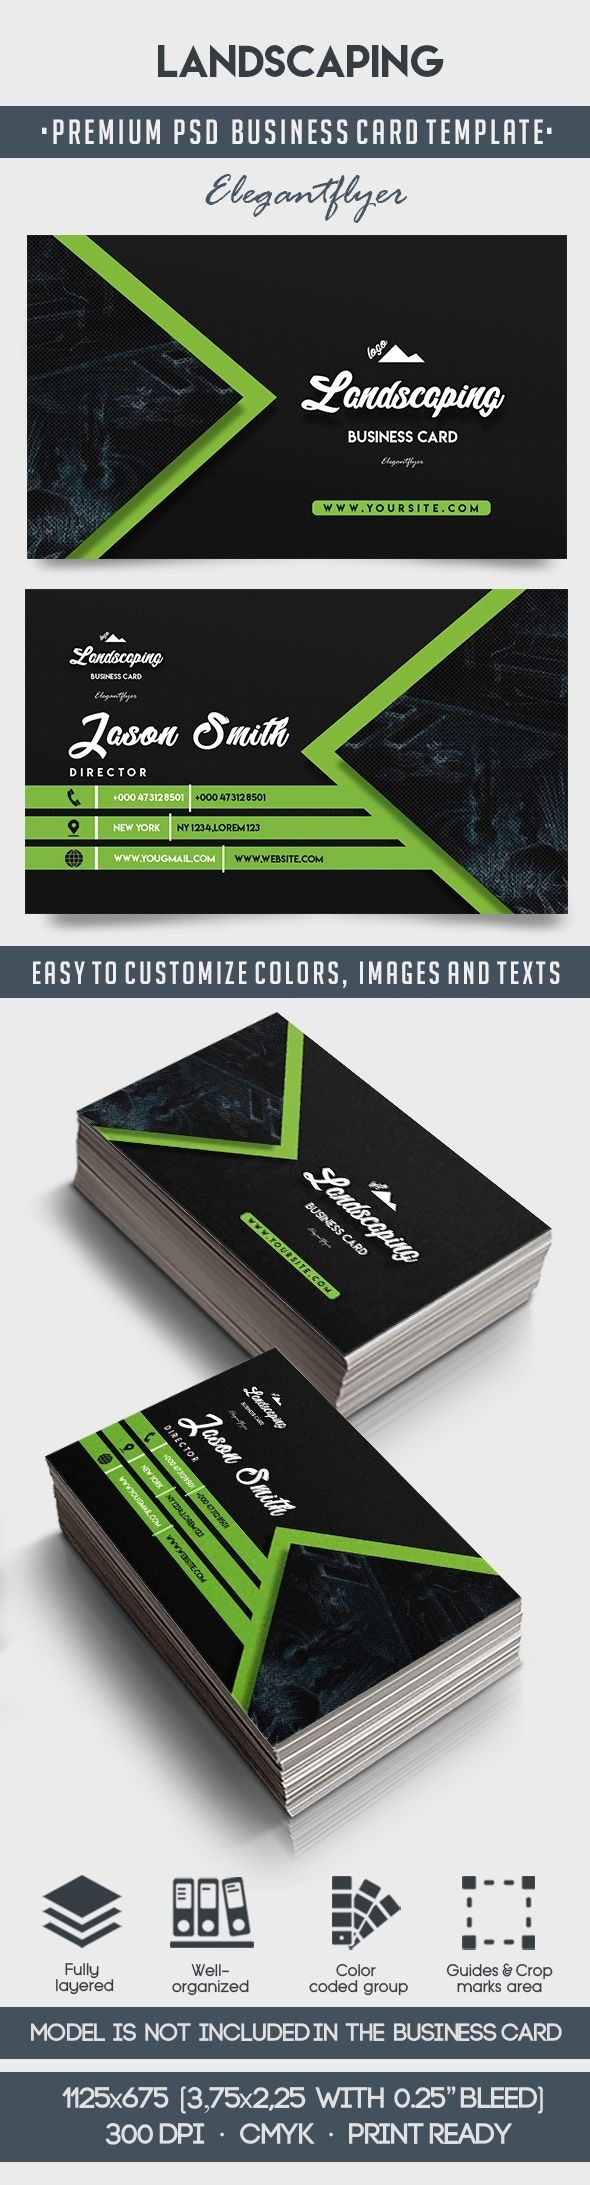 Landscaping – Business Card Templates Psd | By Elegantflyer For Landscaping Business Card Template